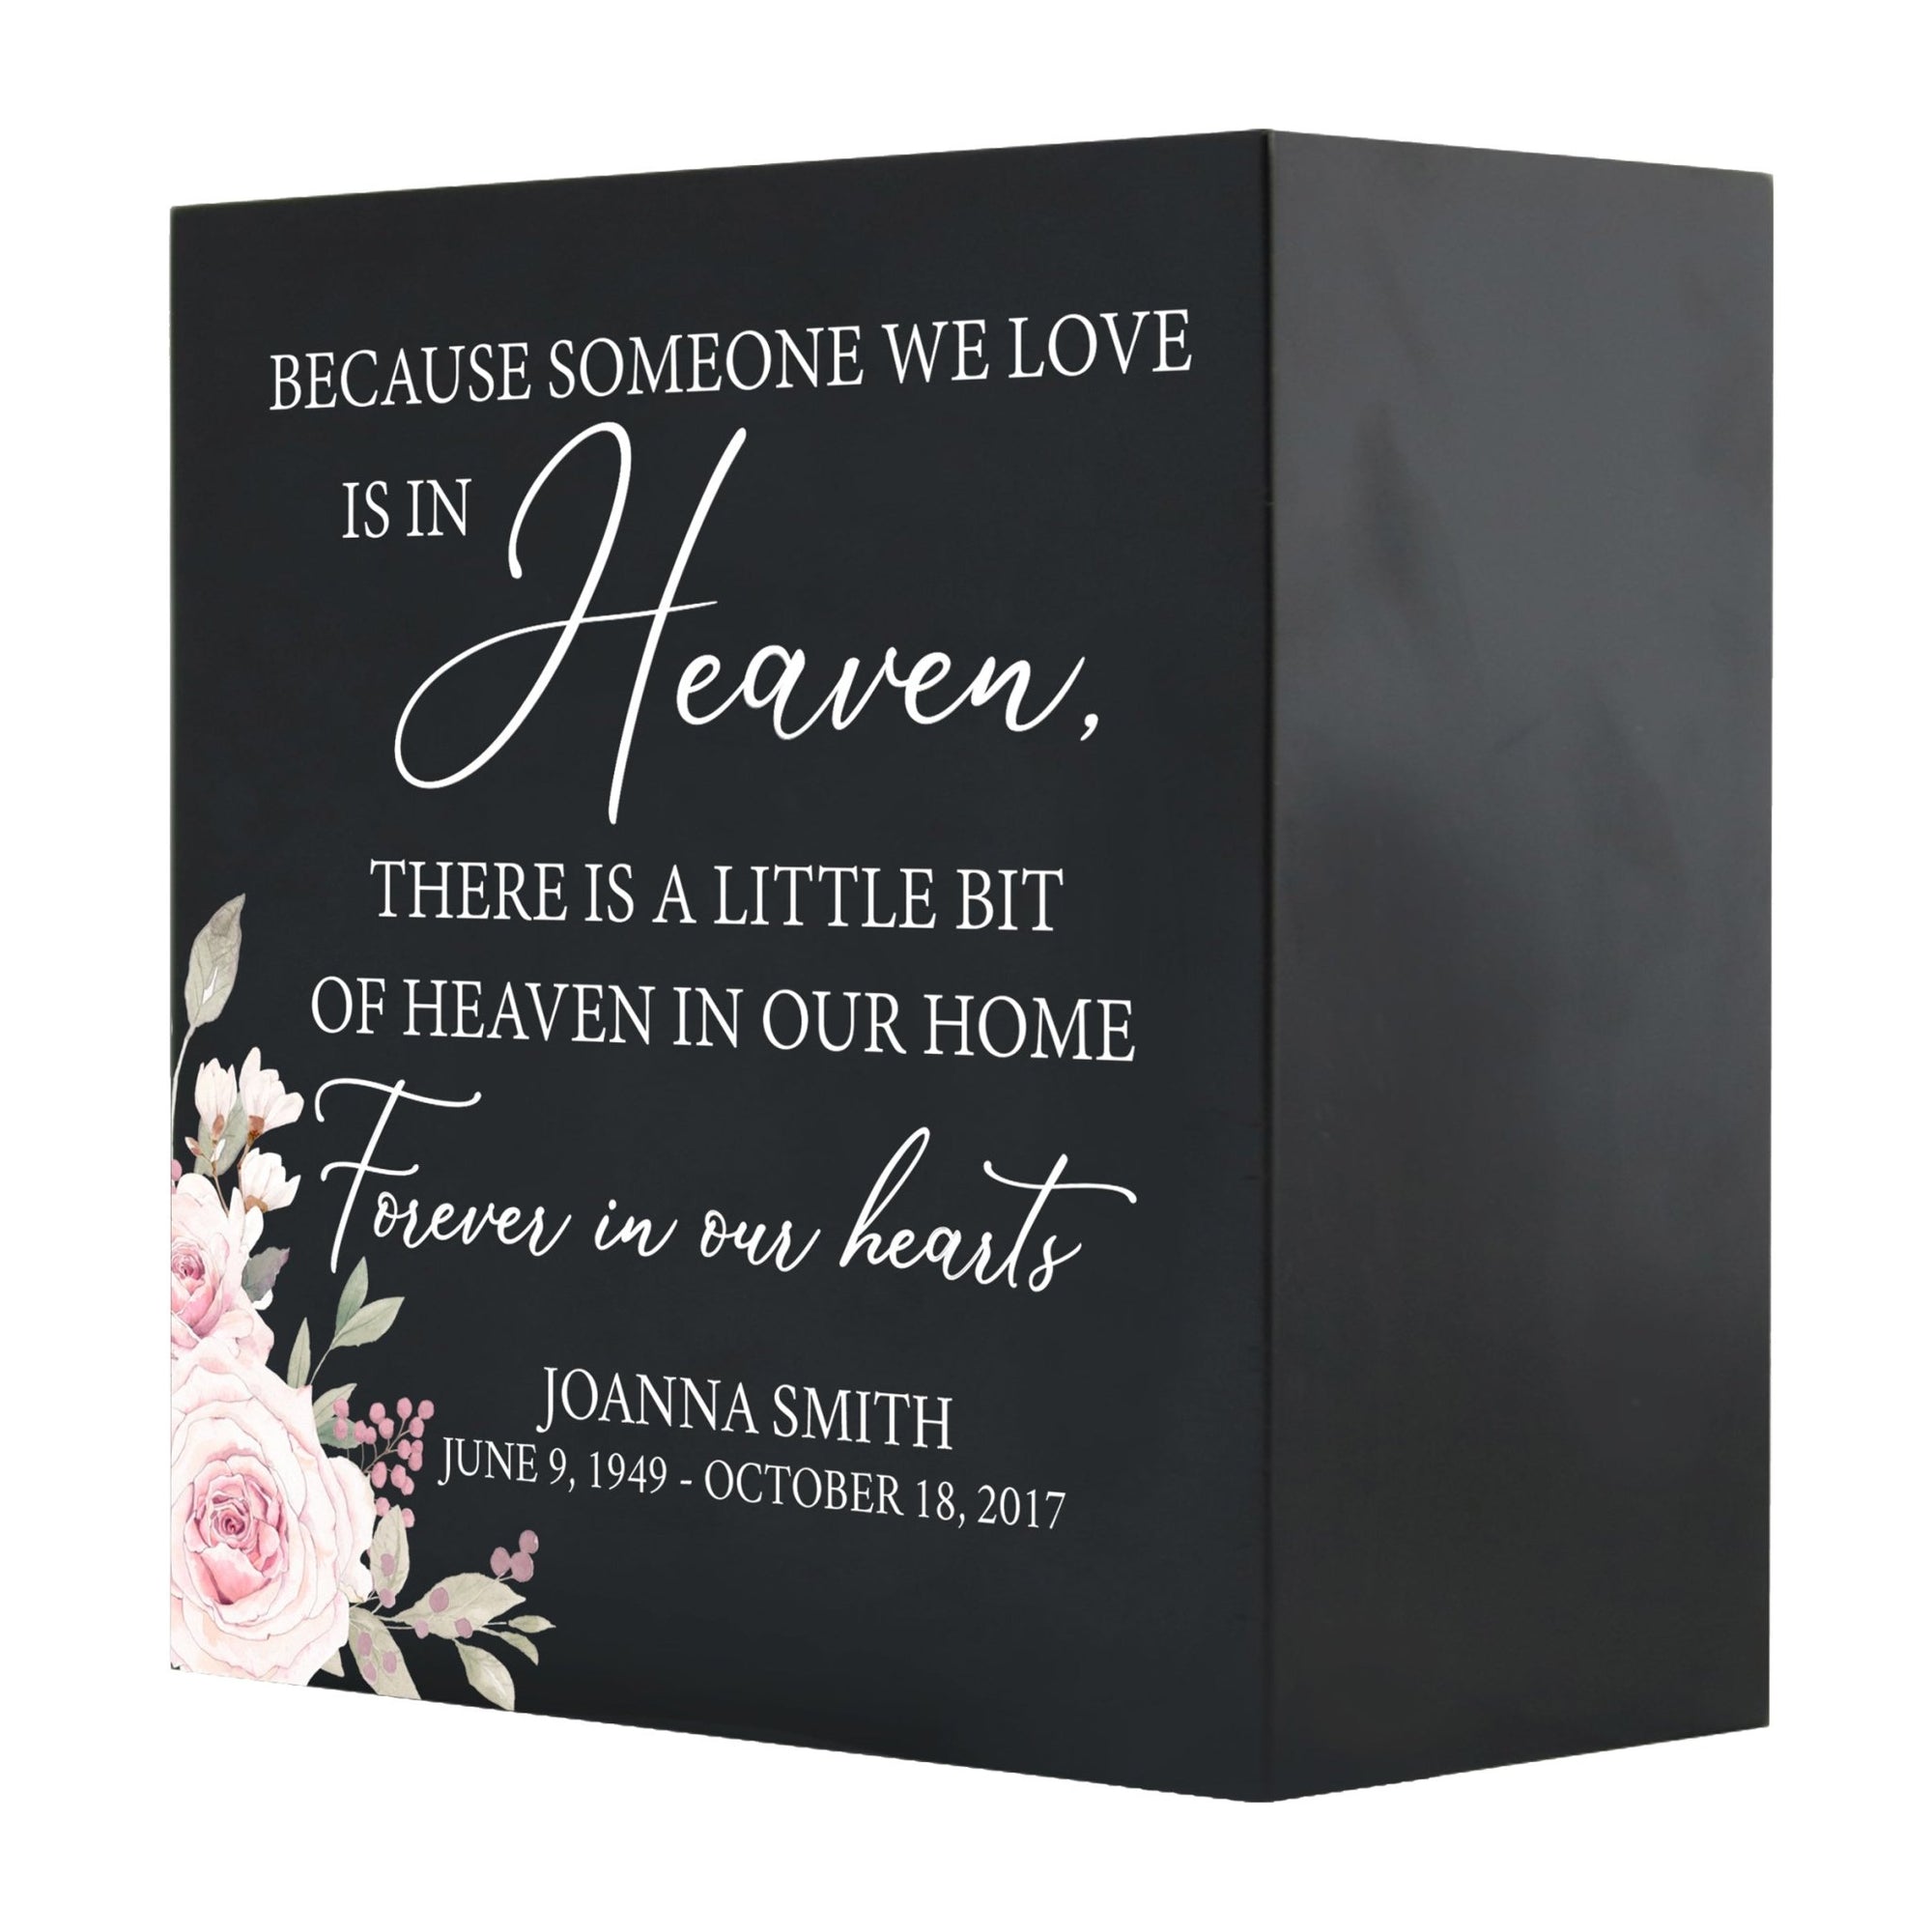 Personalized Modern Inspirational Memorial Wooden Shadow Box and Urn 6x6 holds 53 cu in of Human Ashes - Because Someone We Love (Black) - LifeSong Milestones